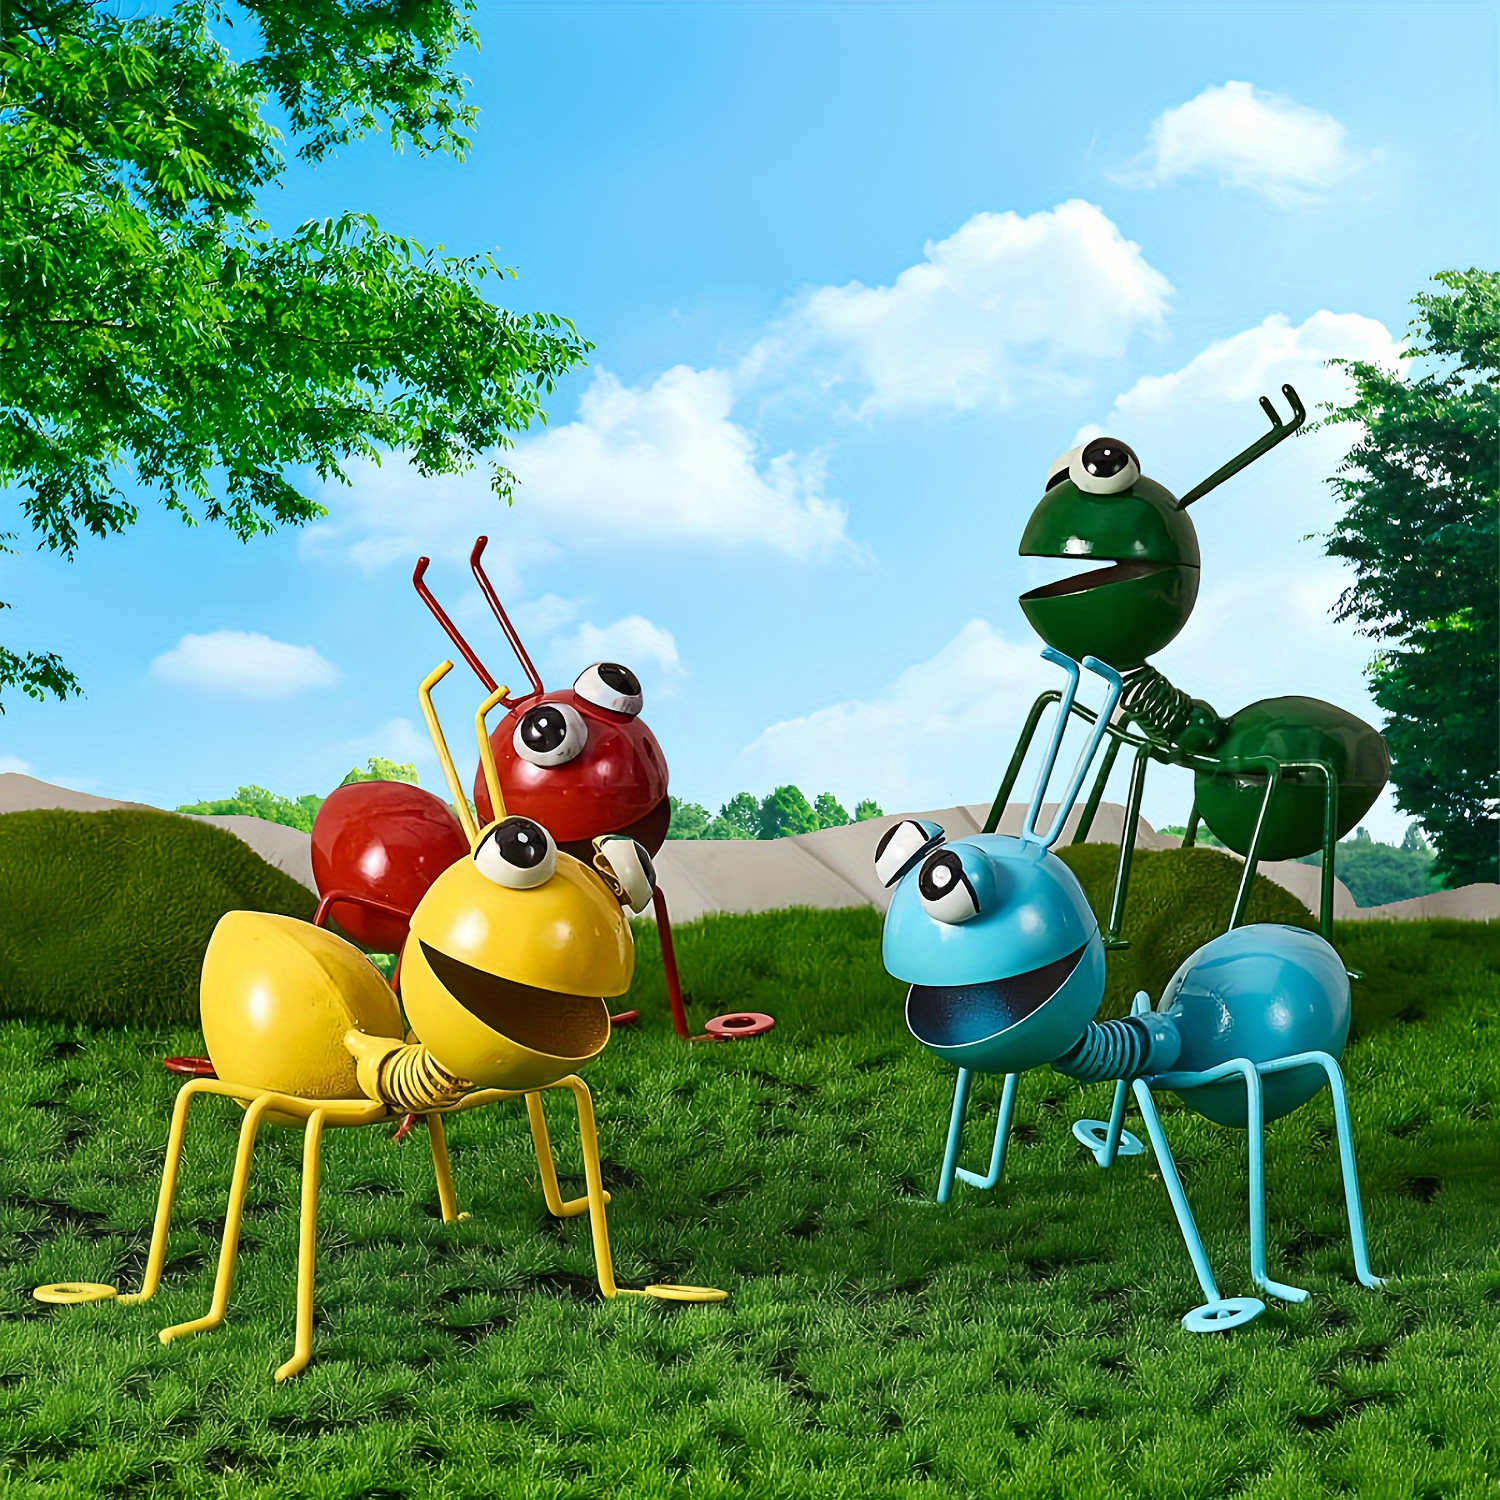 

4-piece Metal Ant Sculpture Set - Colorful And Cute Insect Decorations For Home Or Garden